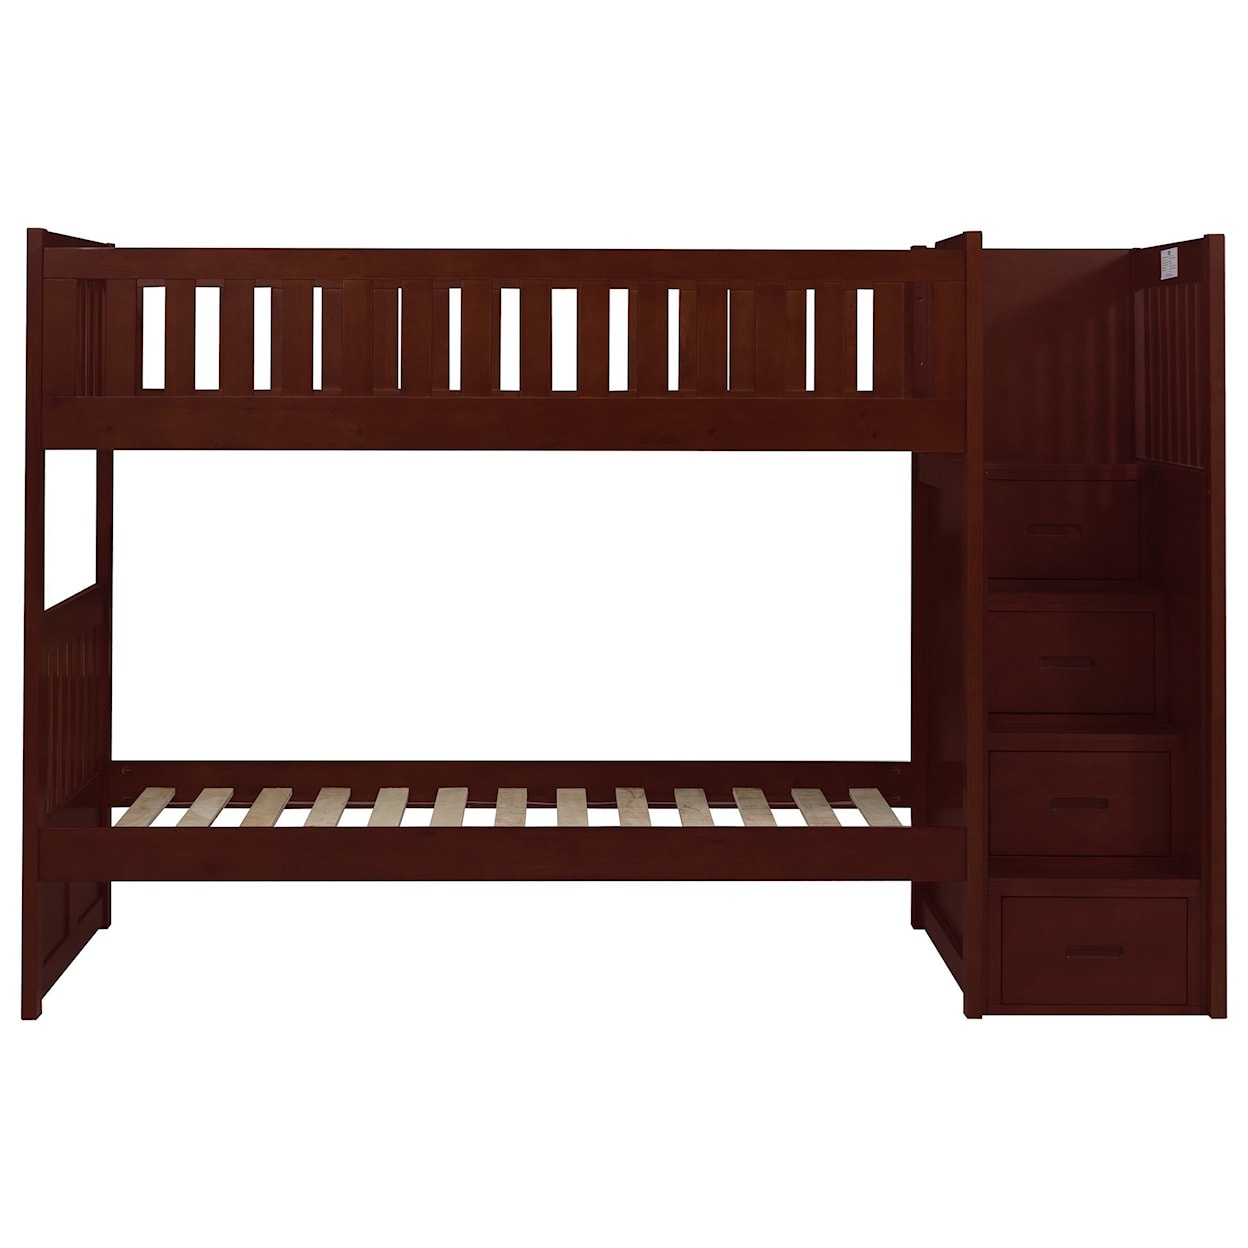 Home Style Cherry Twin Over Twin Bunk Bed w/ Stair Storage